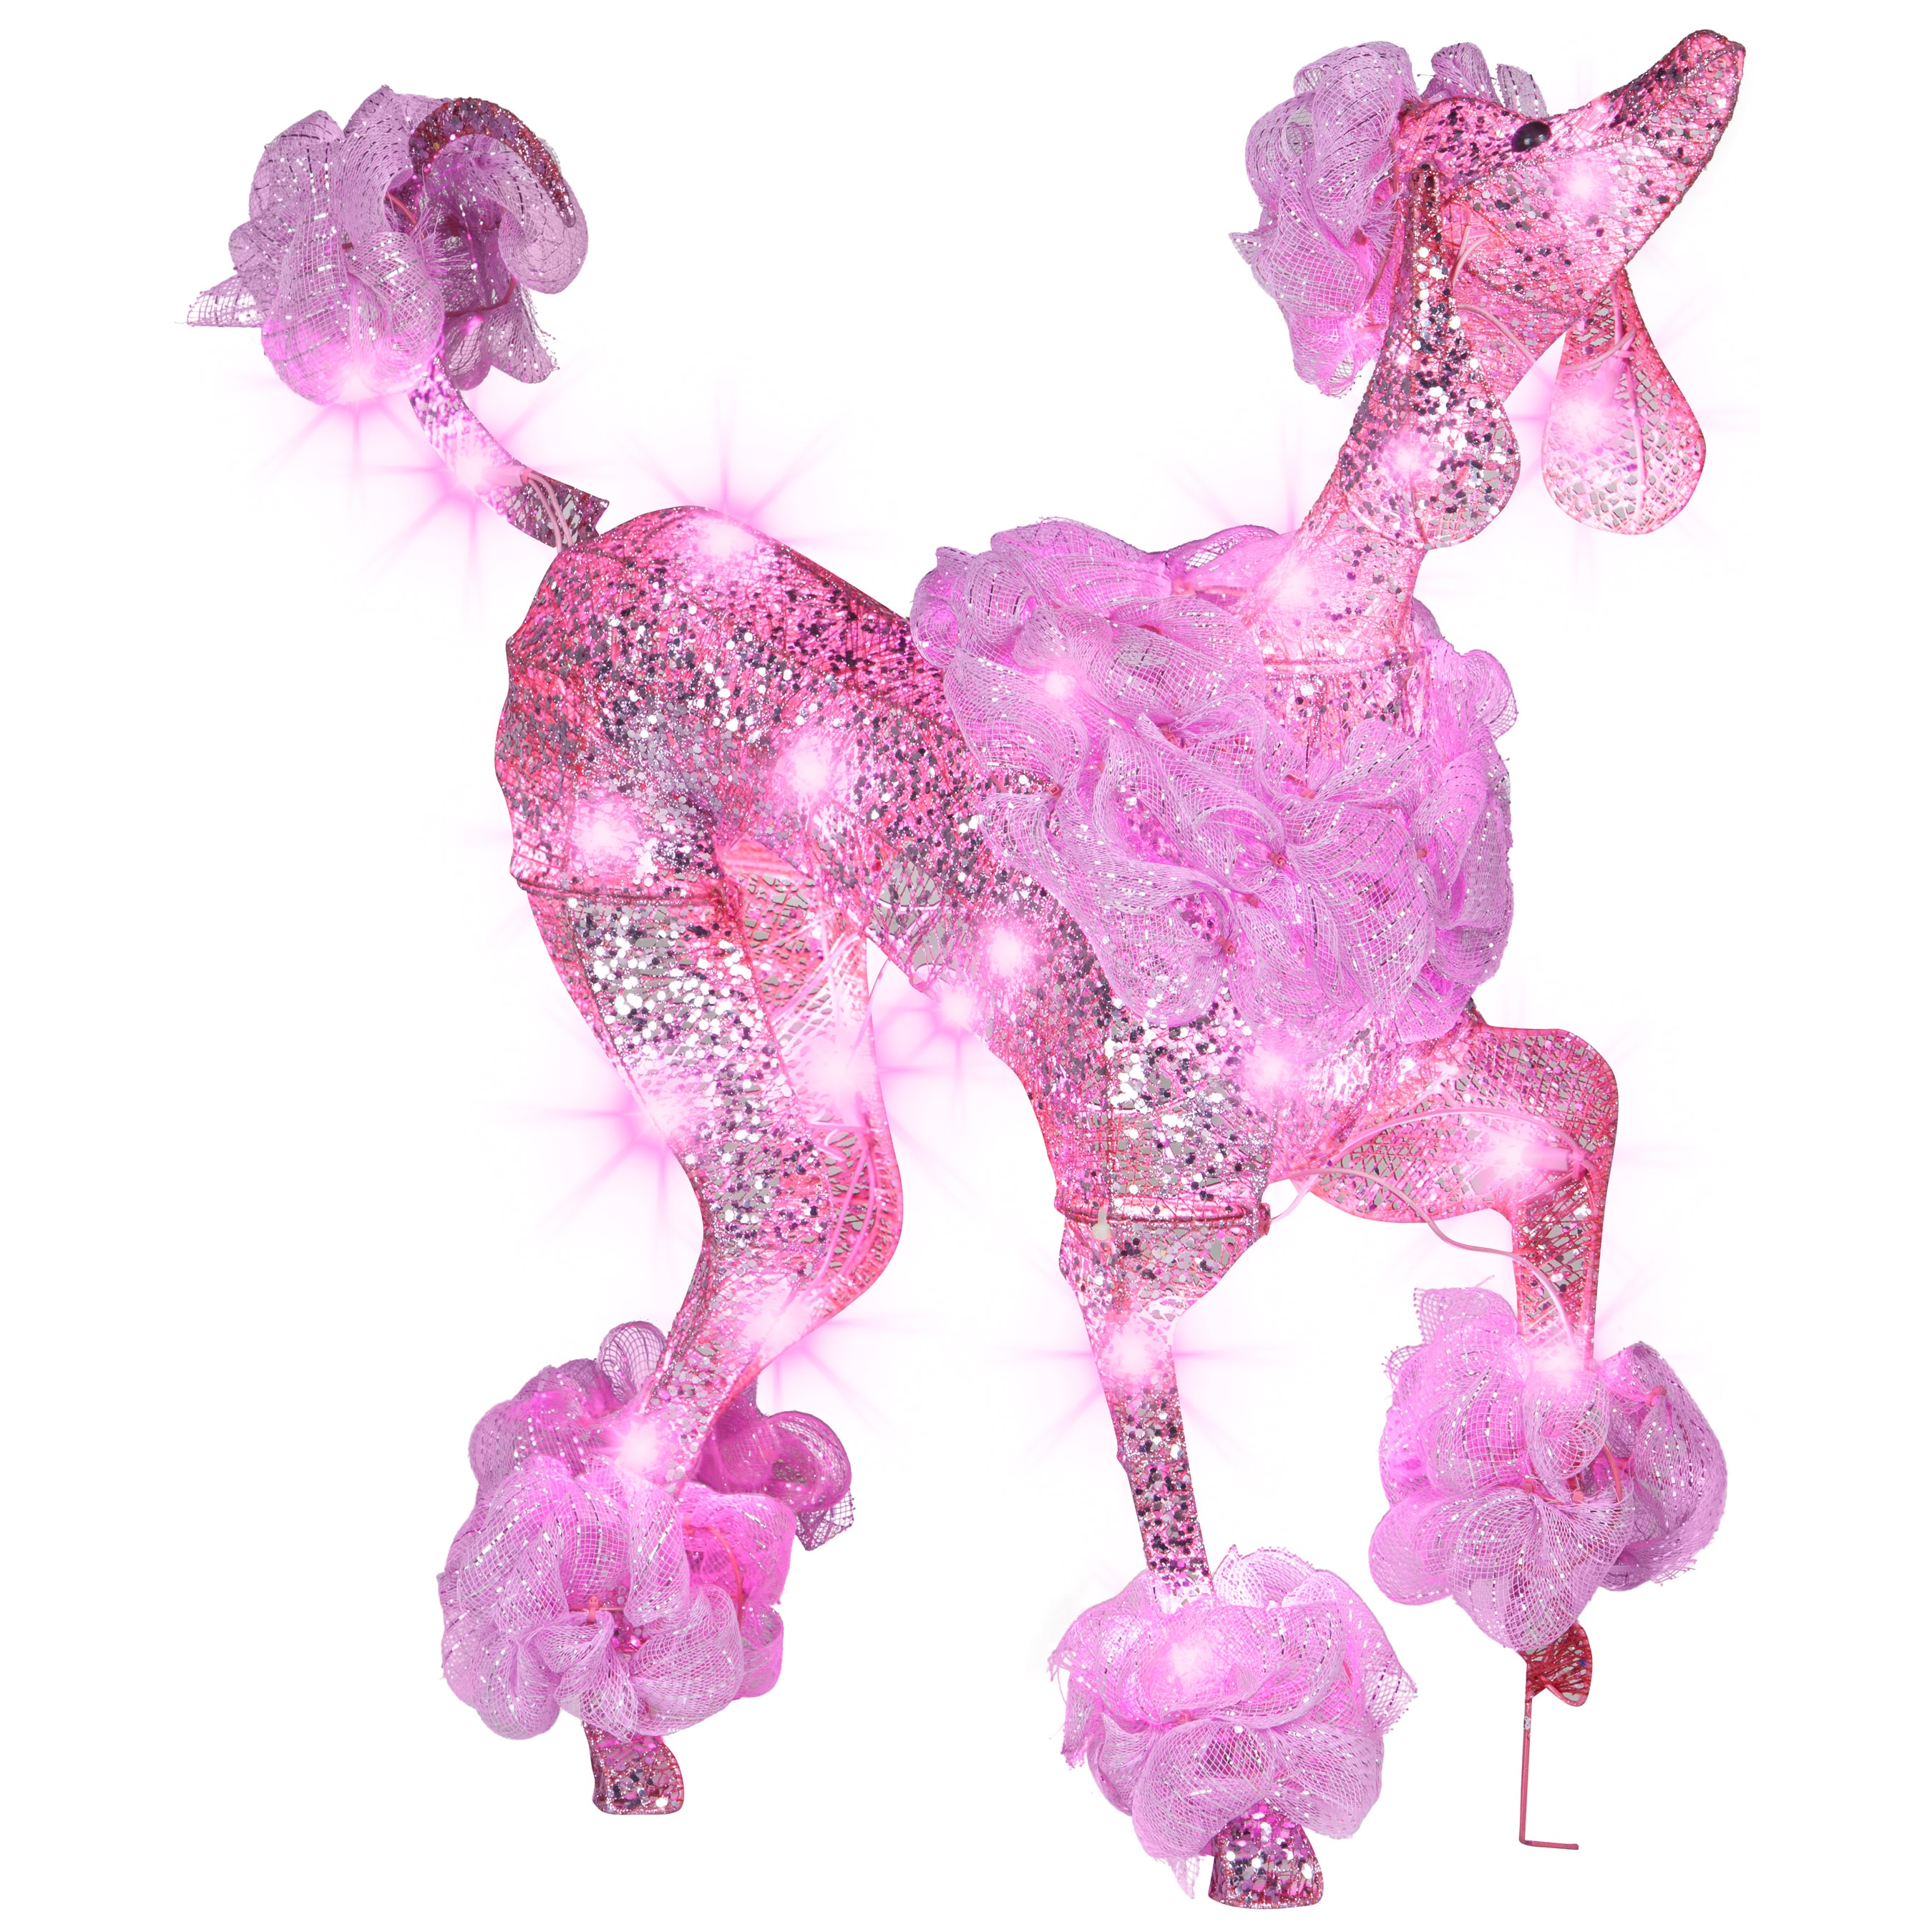 are pink poodles real